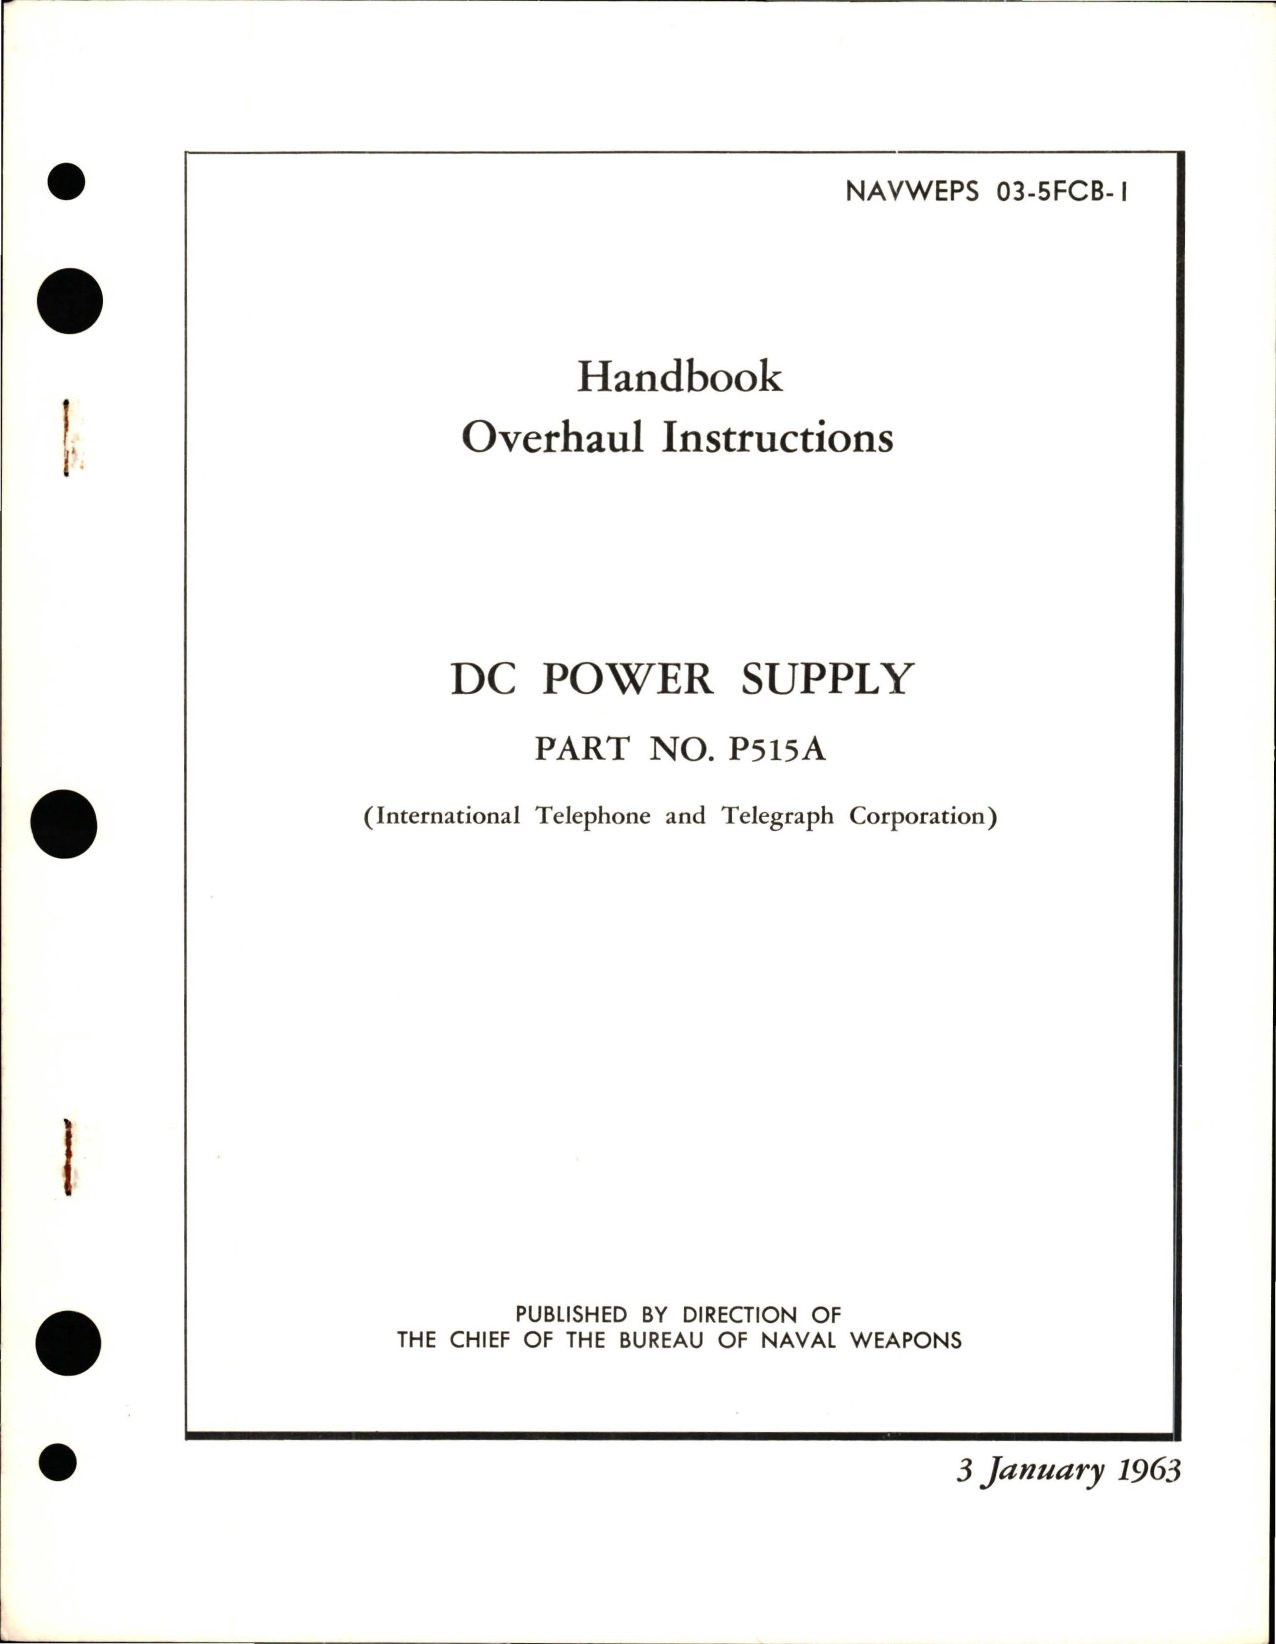 Sample page 1 from AirCorps Library document: Overhaul Instructions for DC Power Supply - Part P515A